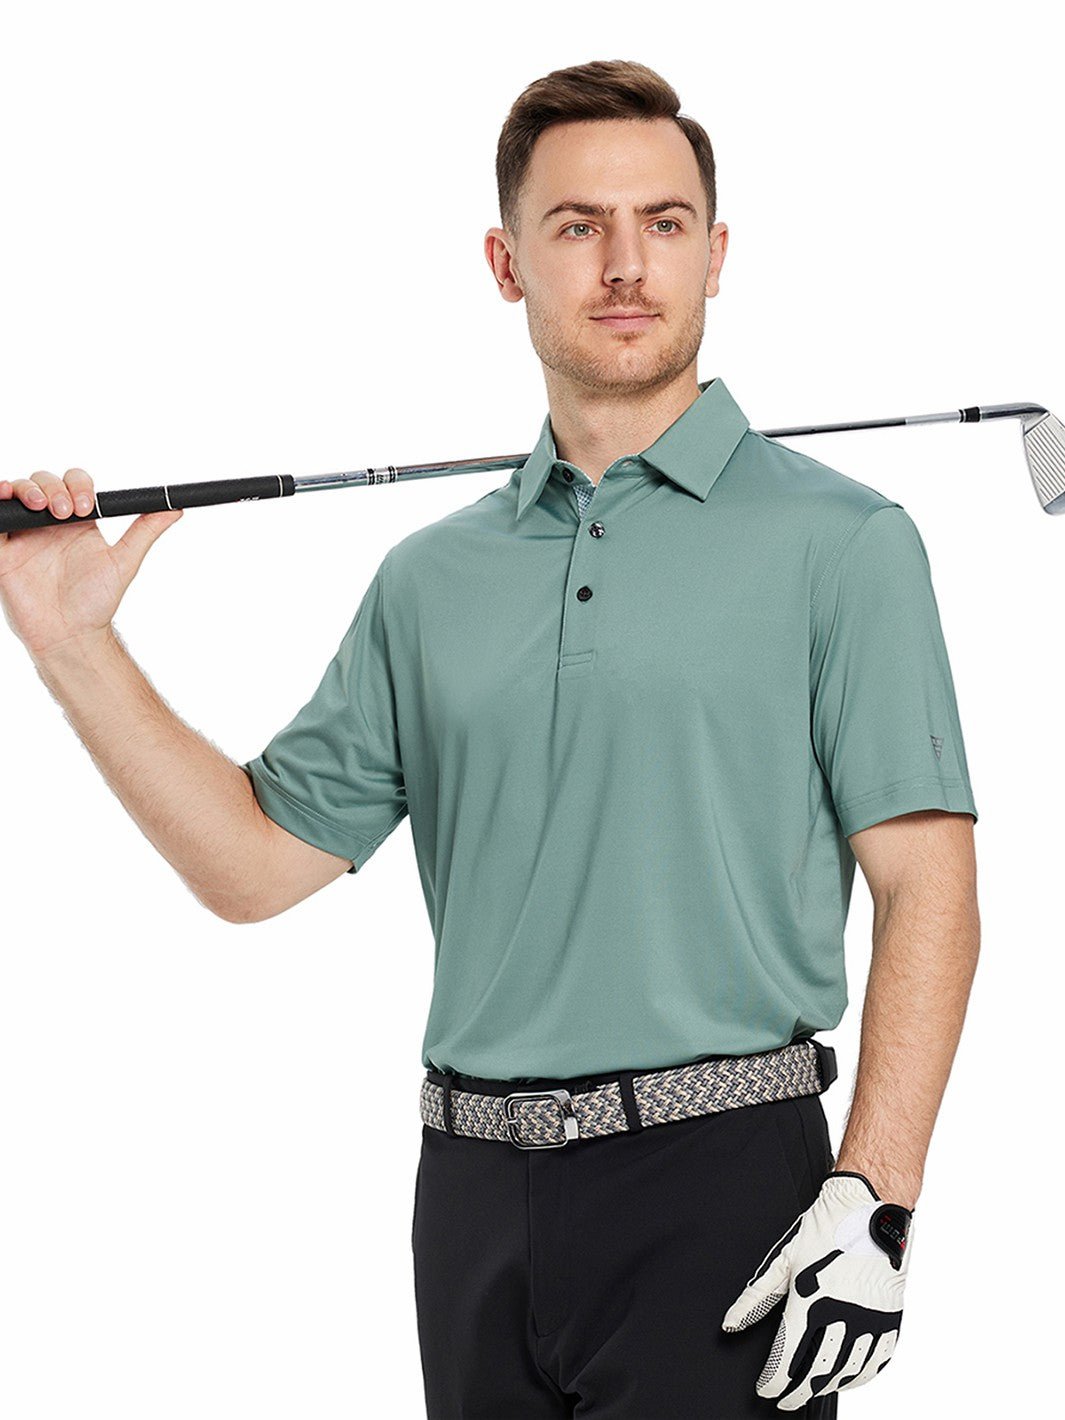 Solid Color Golf Shirts for Men Casual Dry Fit Golf Polo Shirts ...